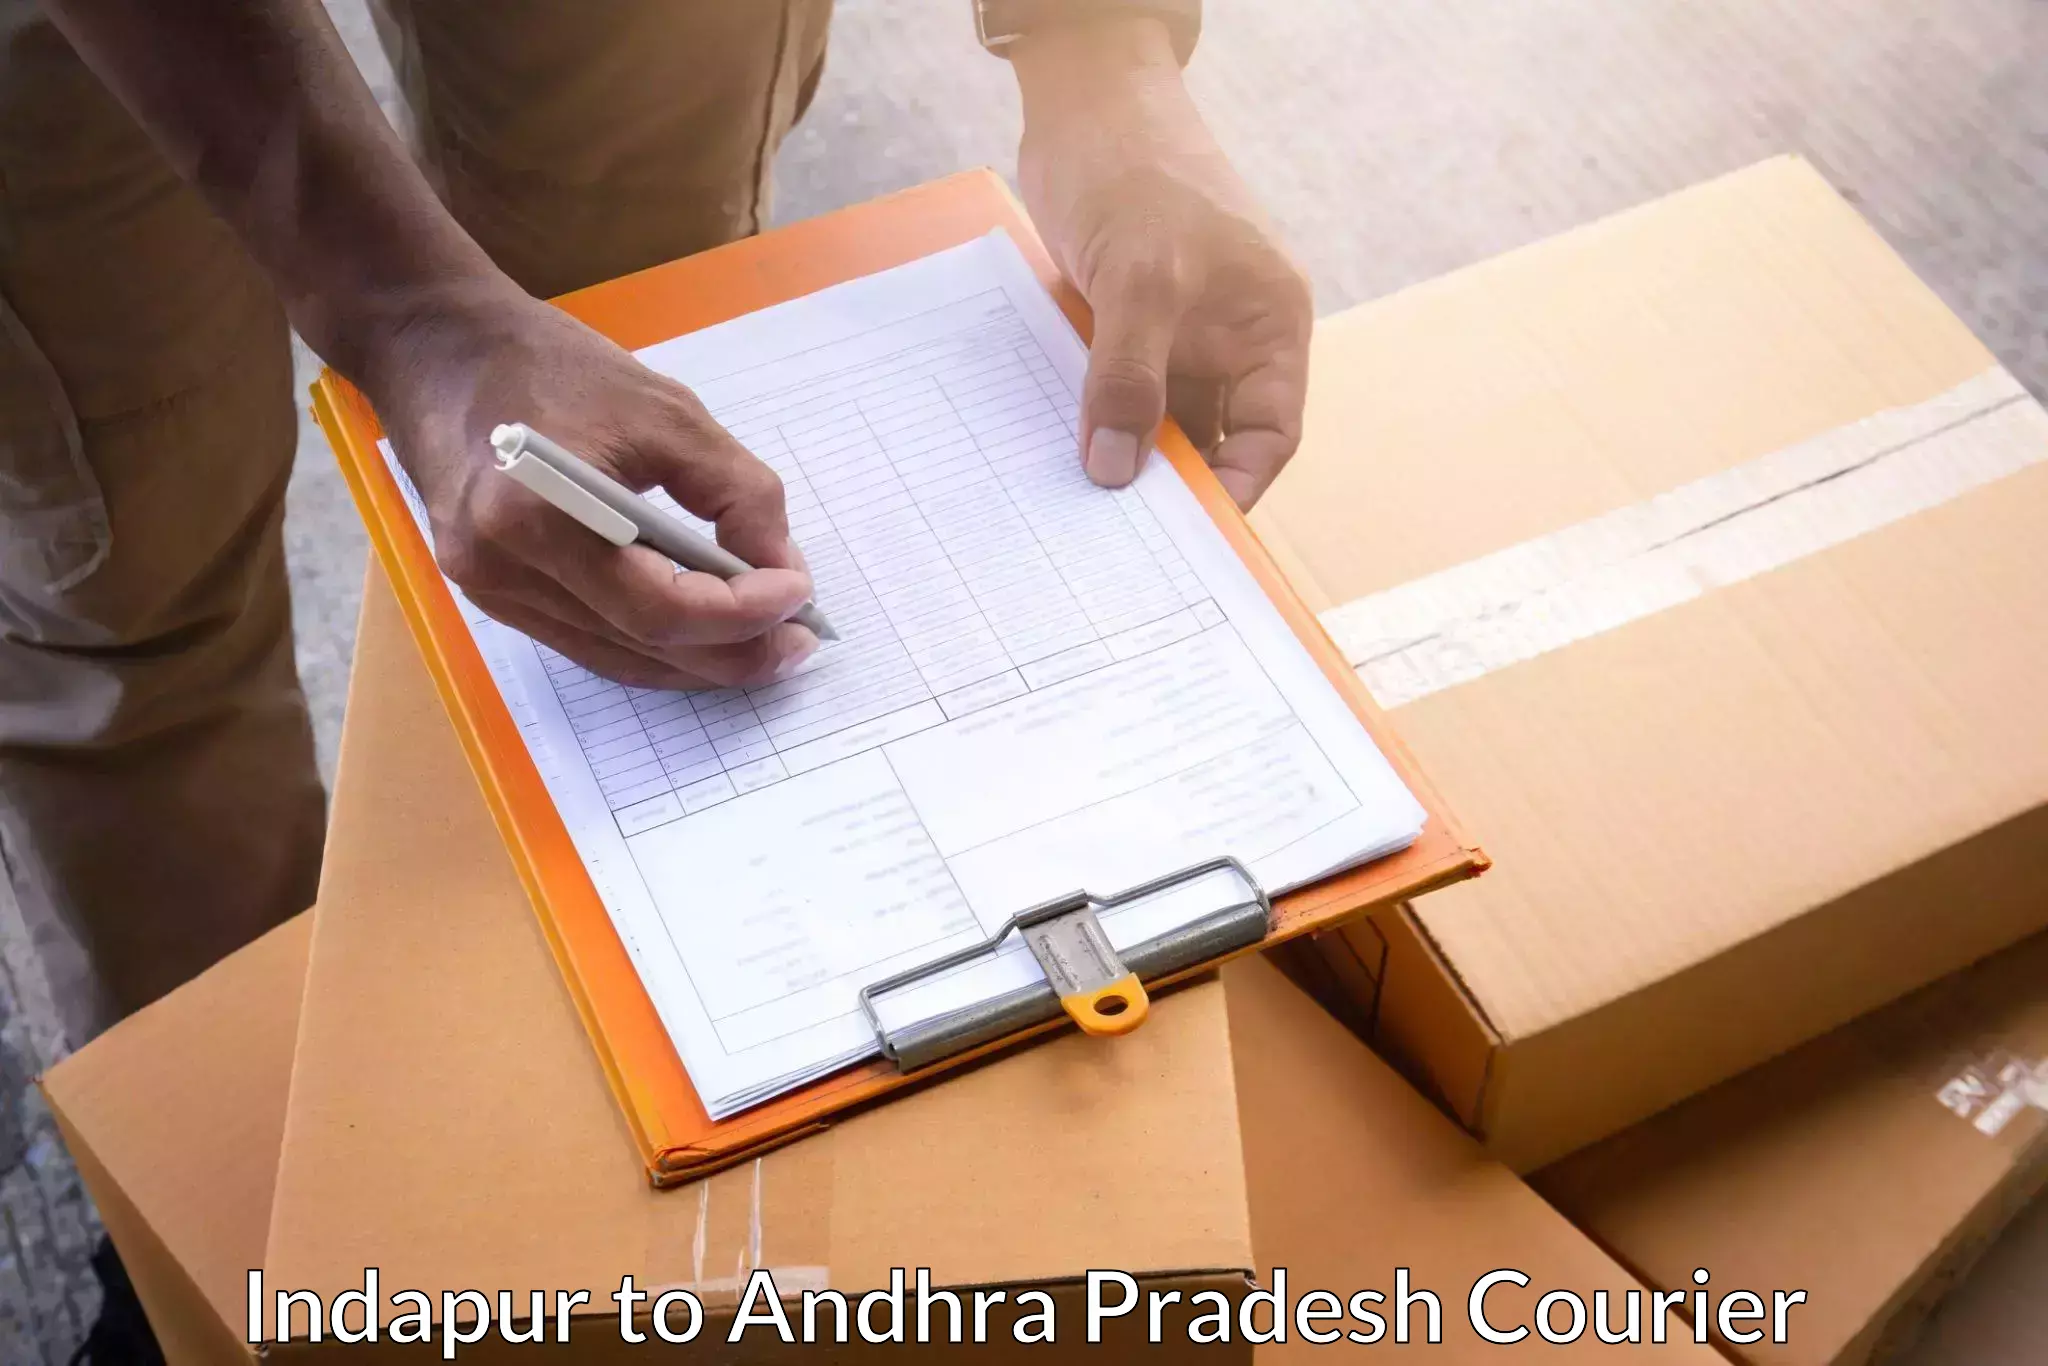 Courier service innovation Indapur to Andhra Pradesh